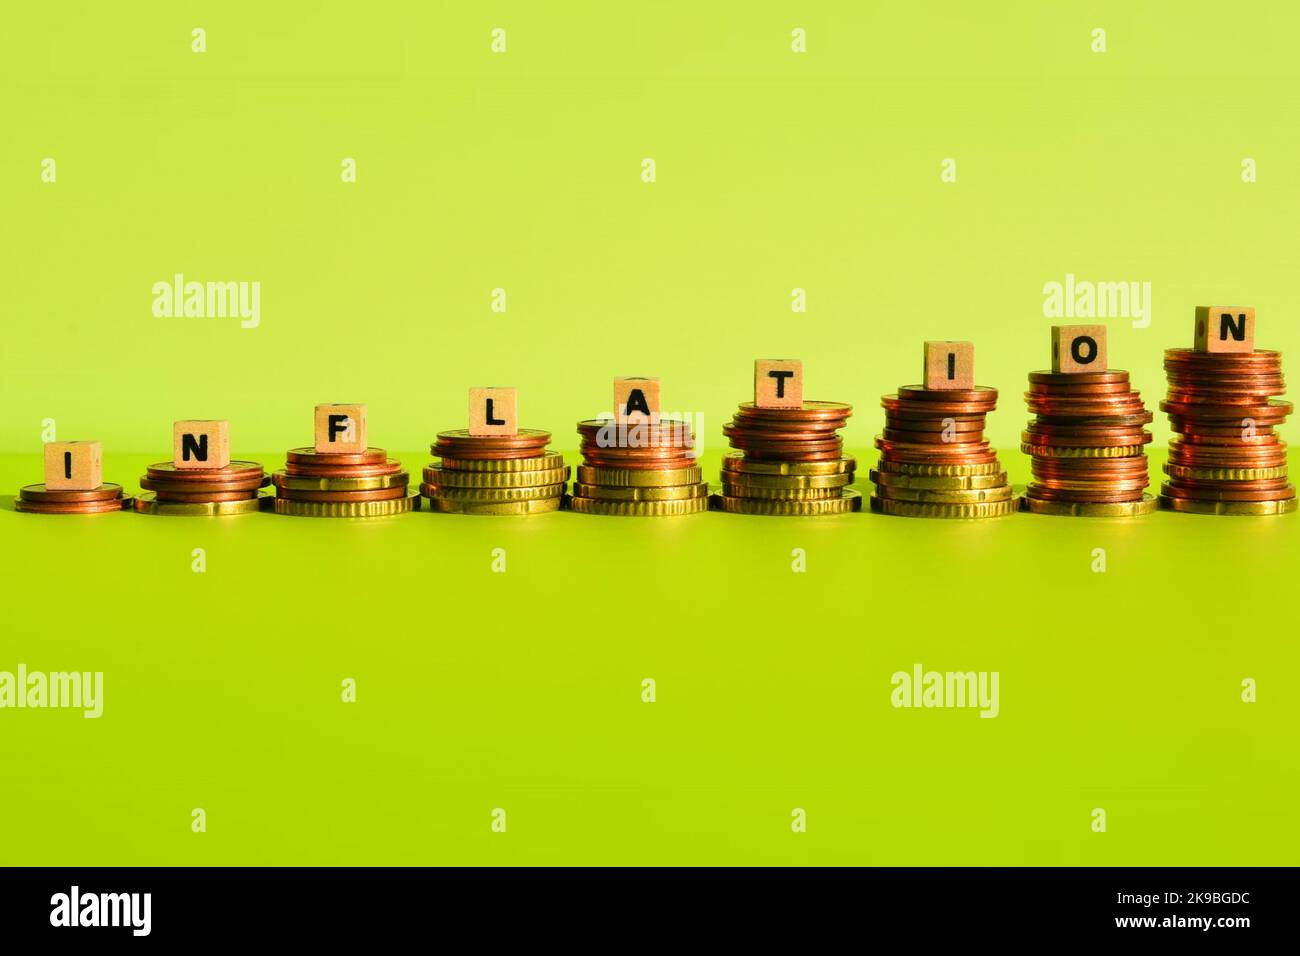 the word inflation on coin stacks Stock Photo